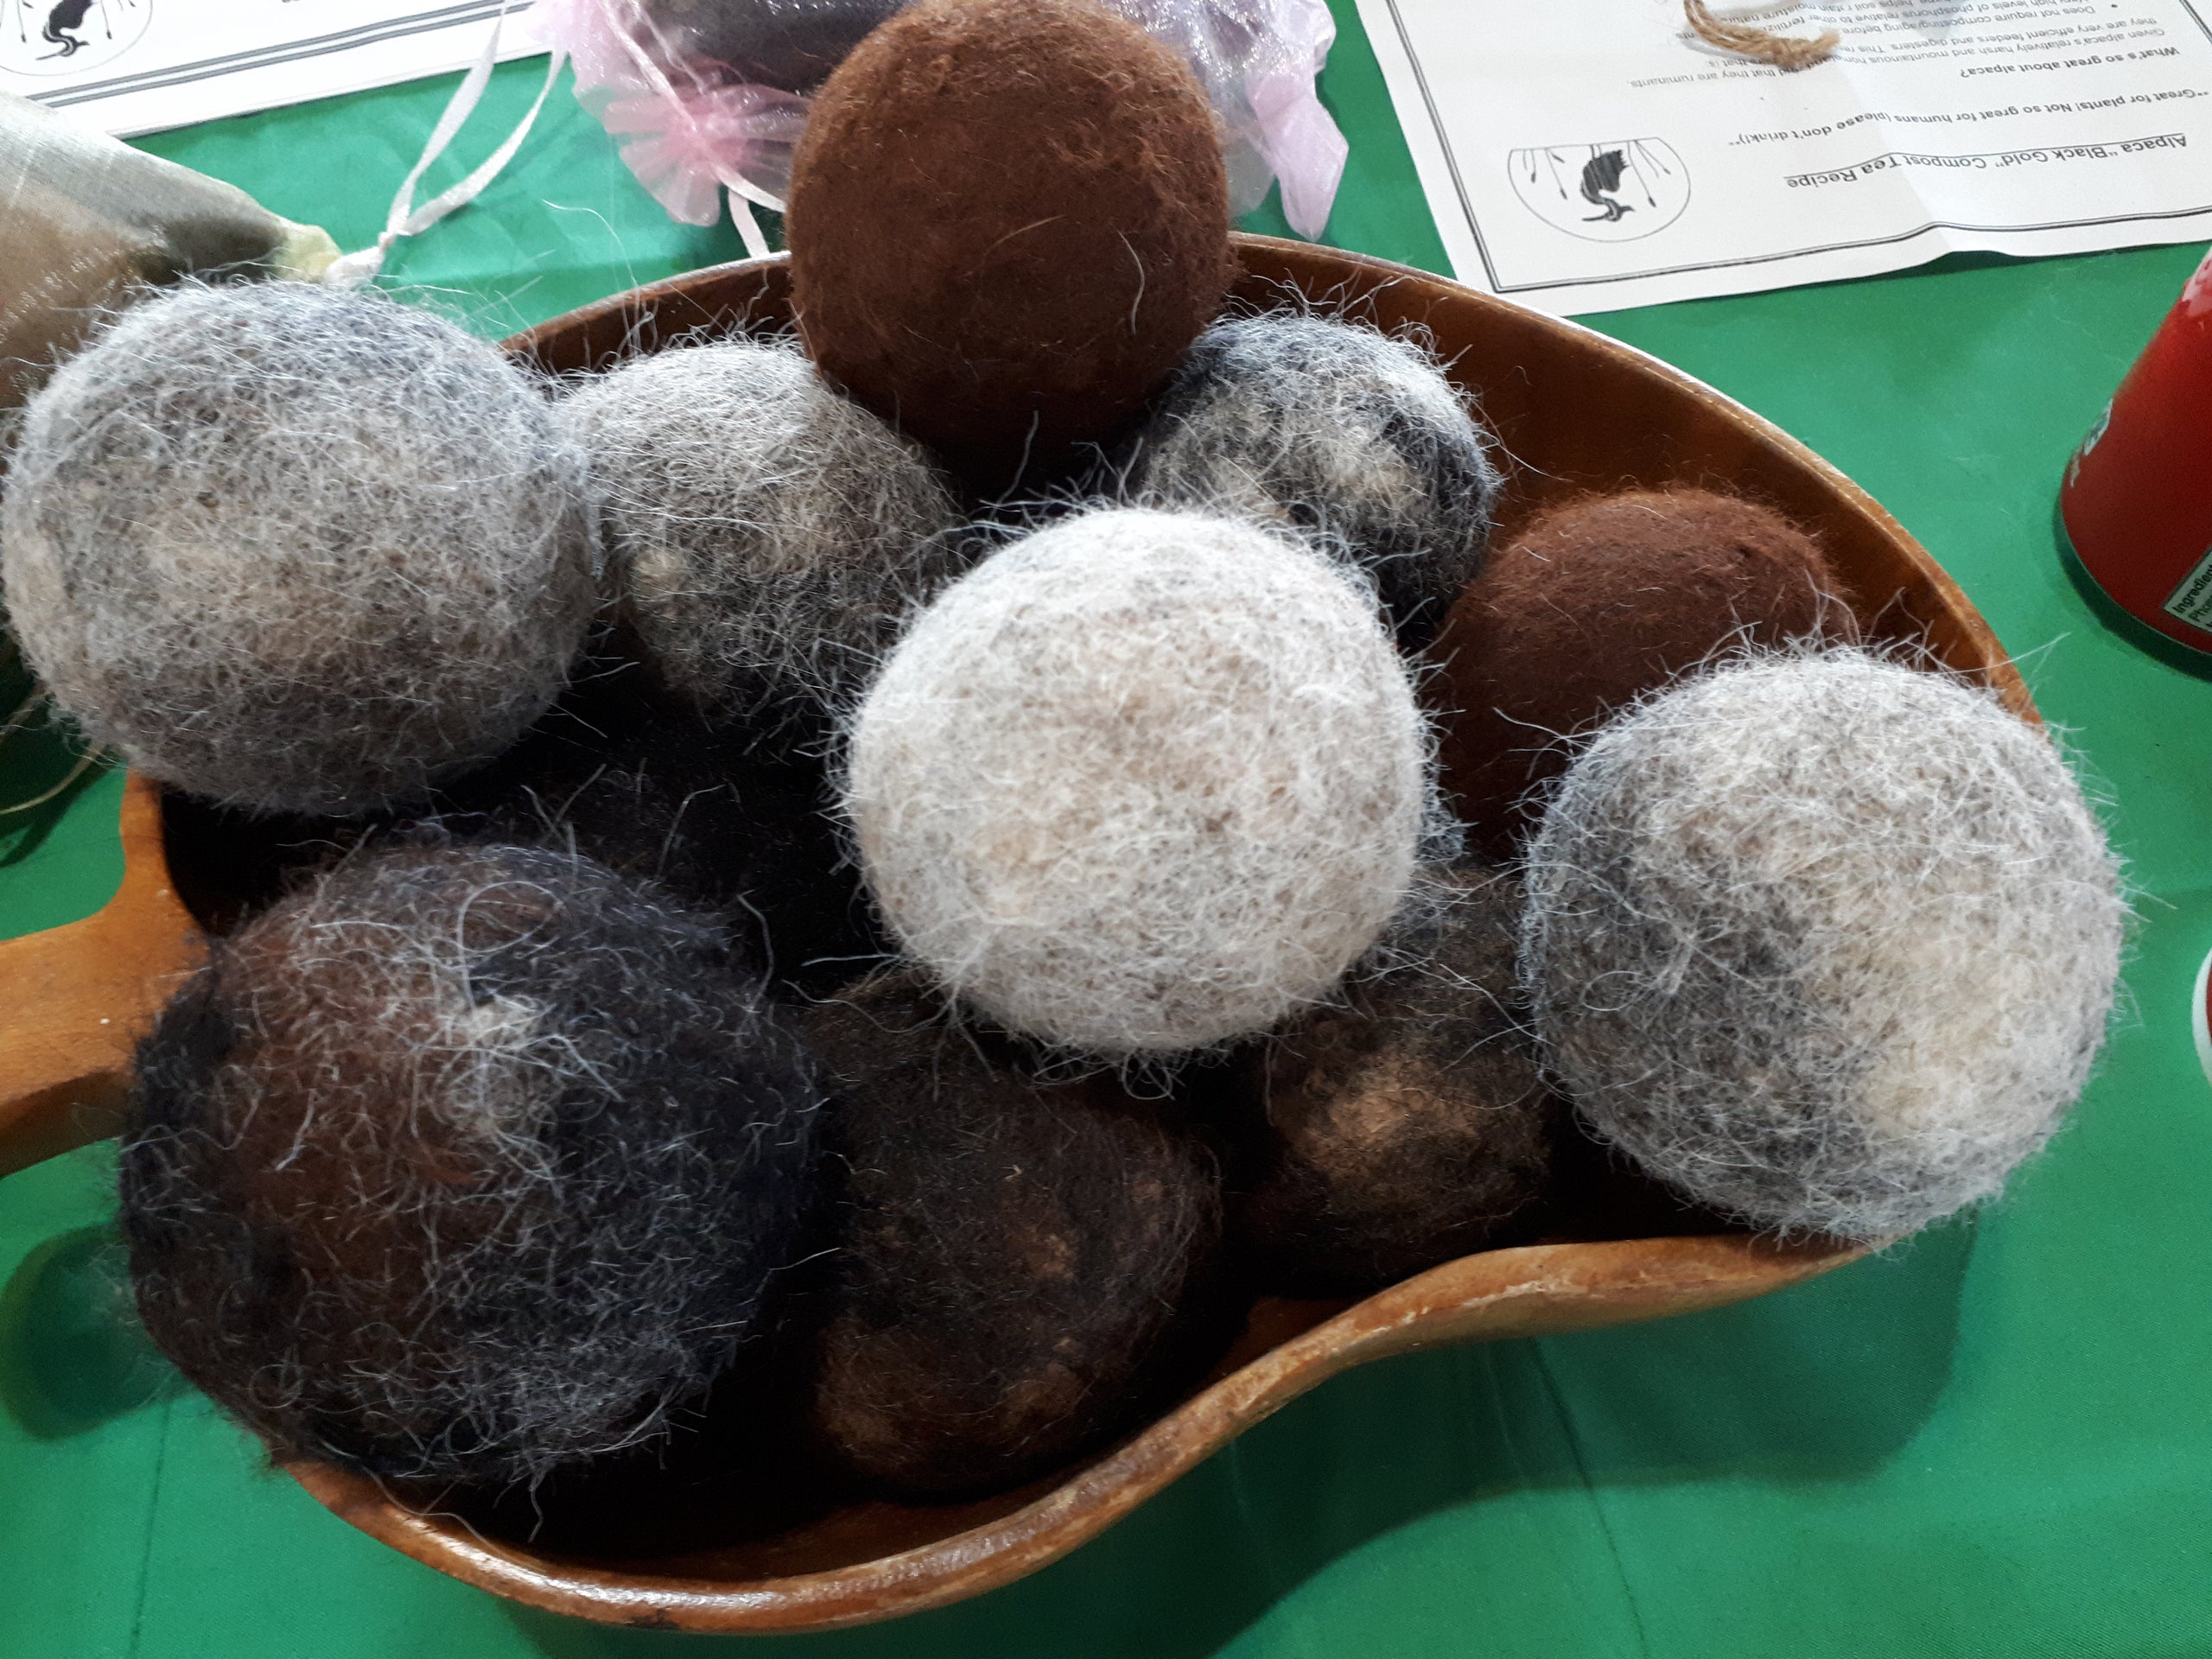 Alpaca Fleece Dryer Balls for Lower Dry Times, Less Static and No Chemicals, Silver Heron Farm